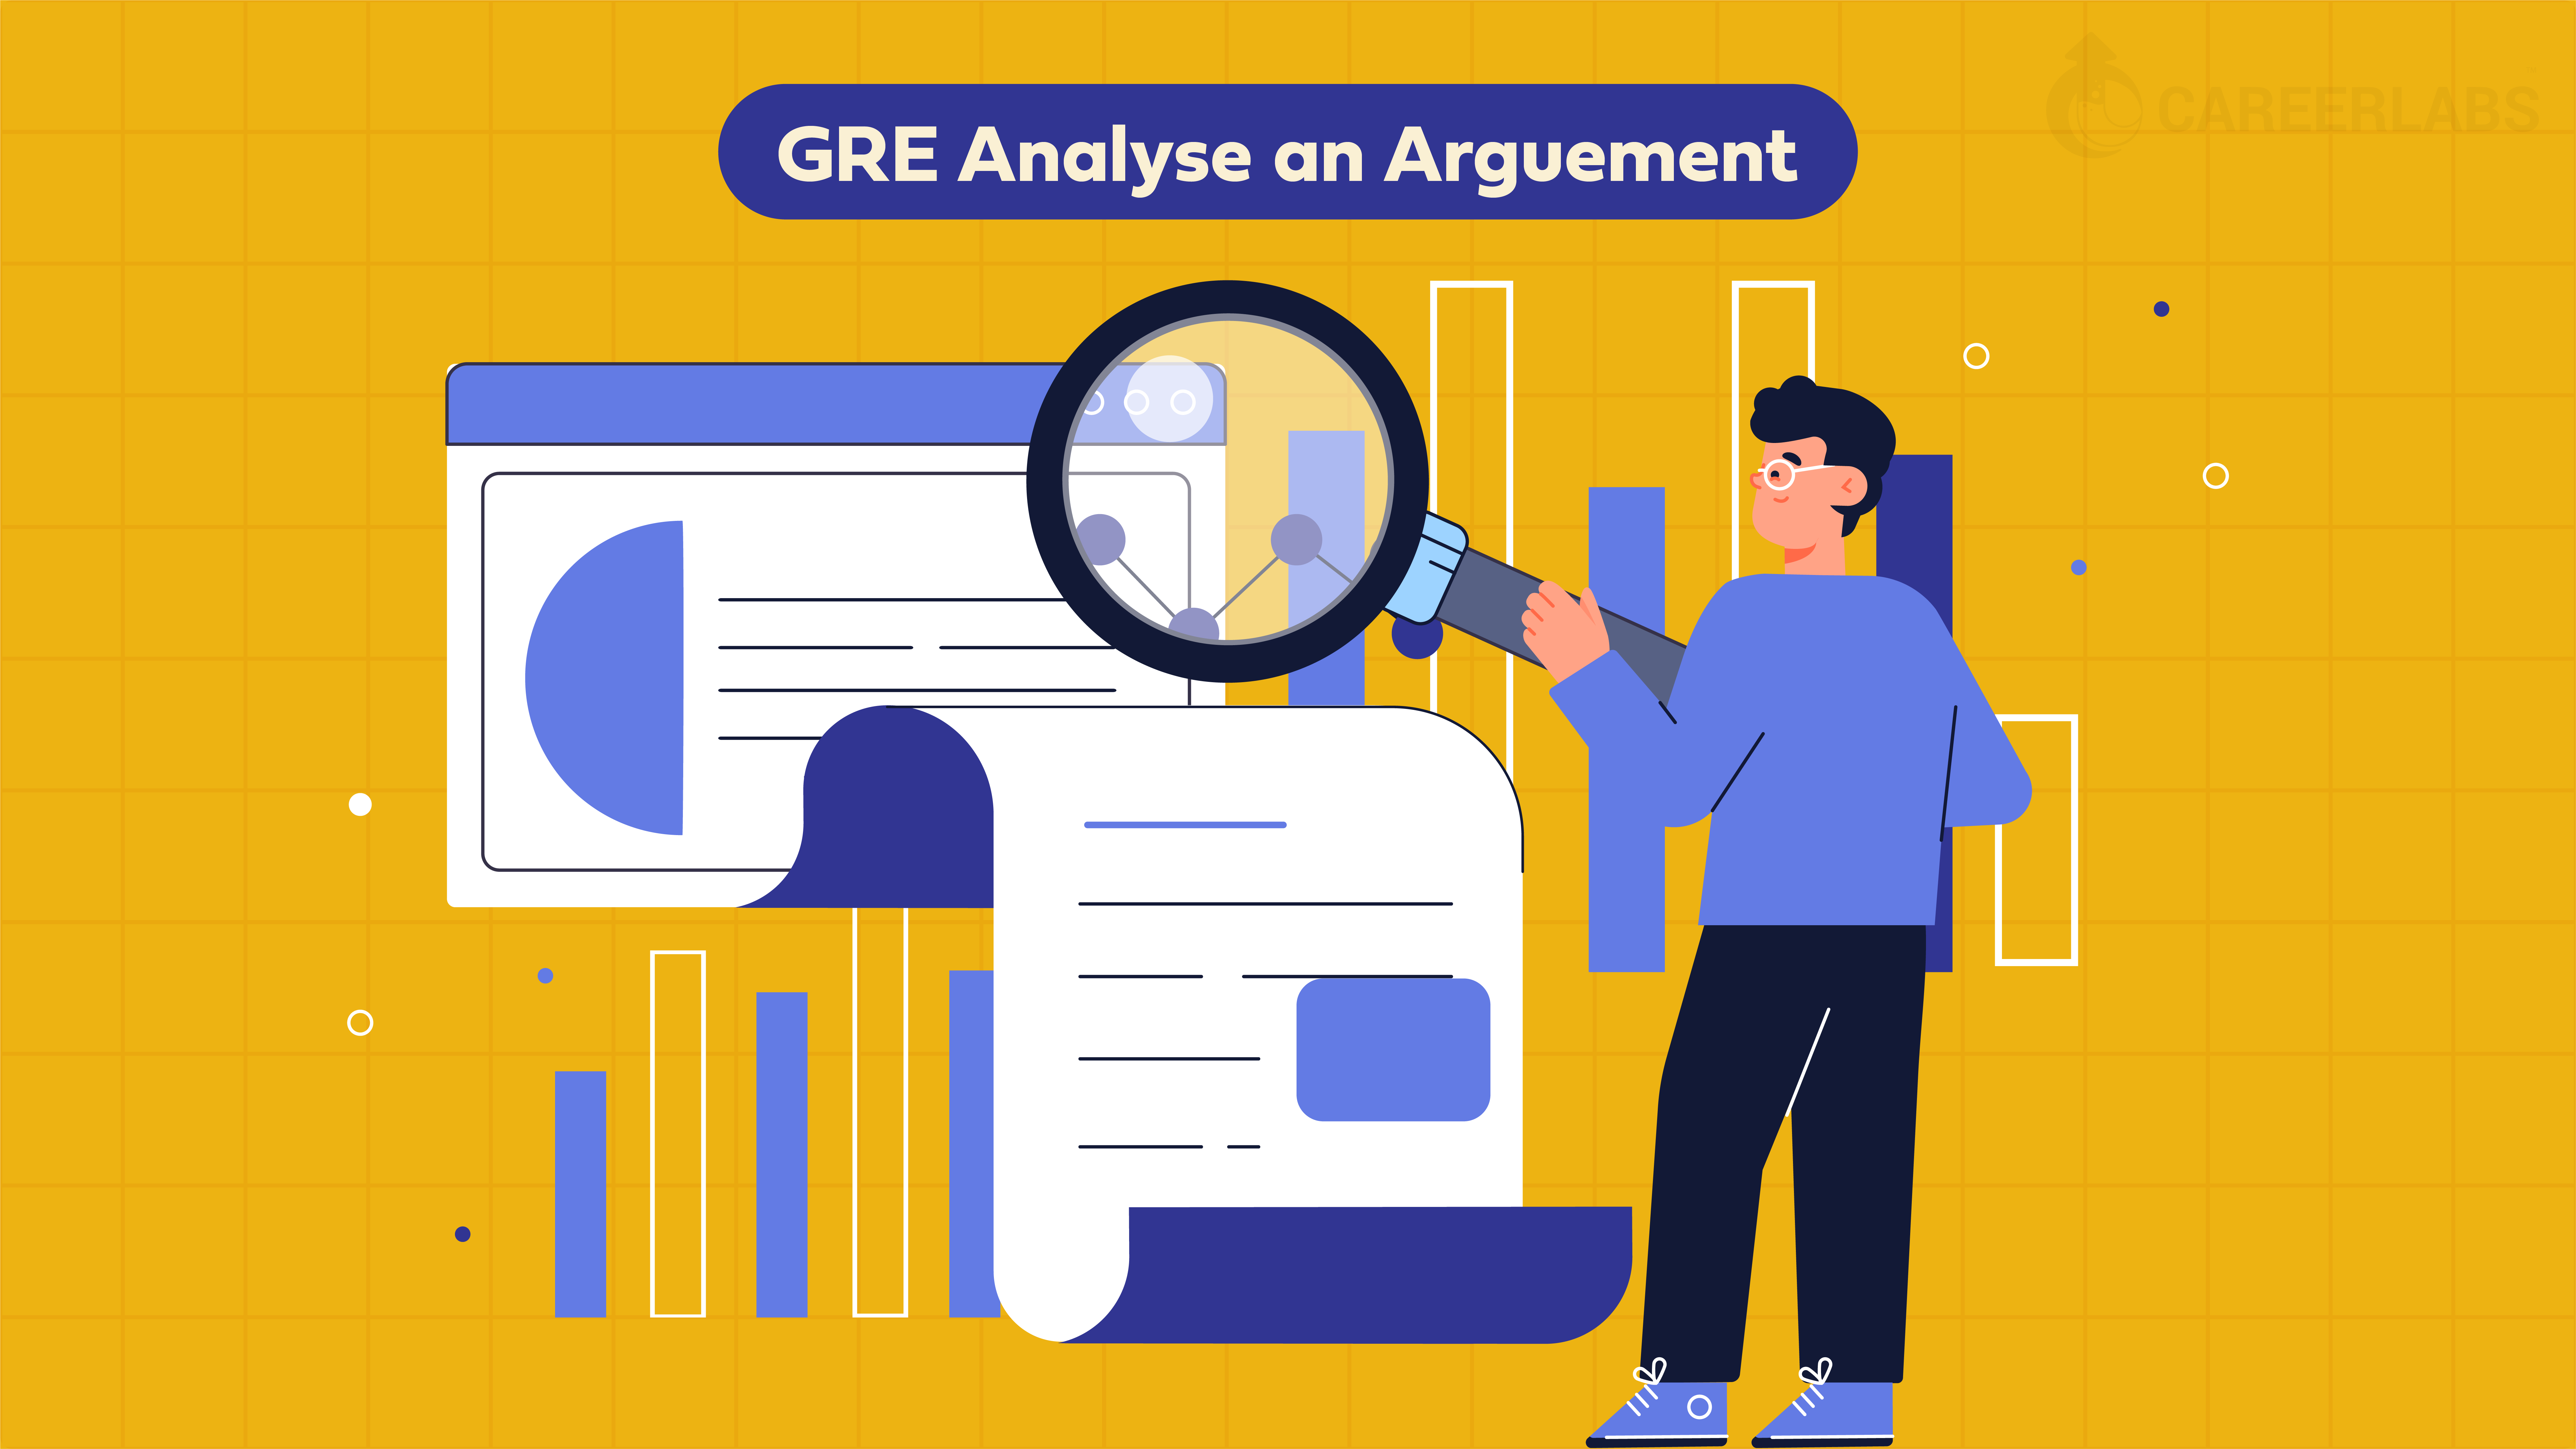 GRE Analyse an Argument